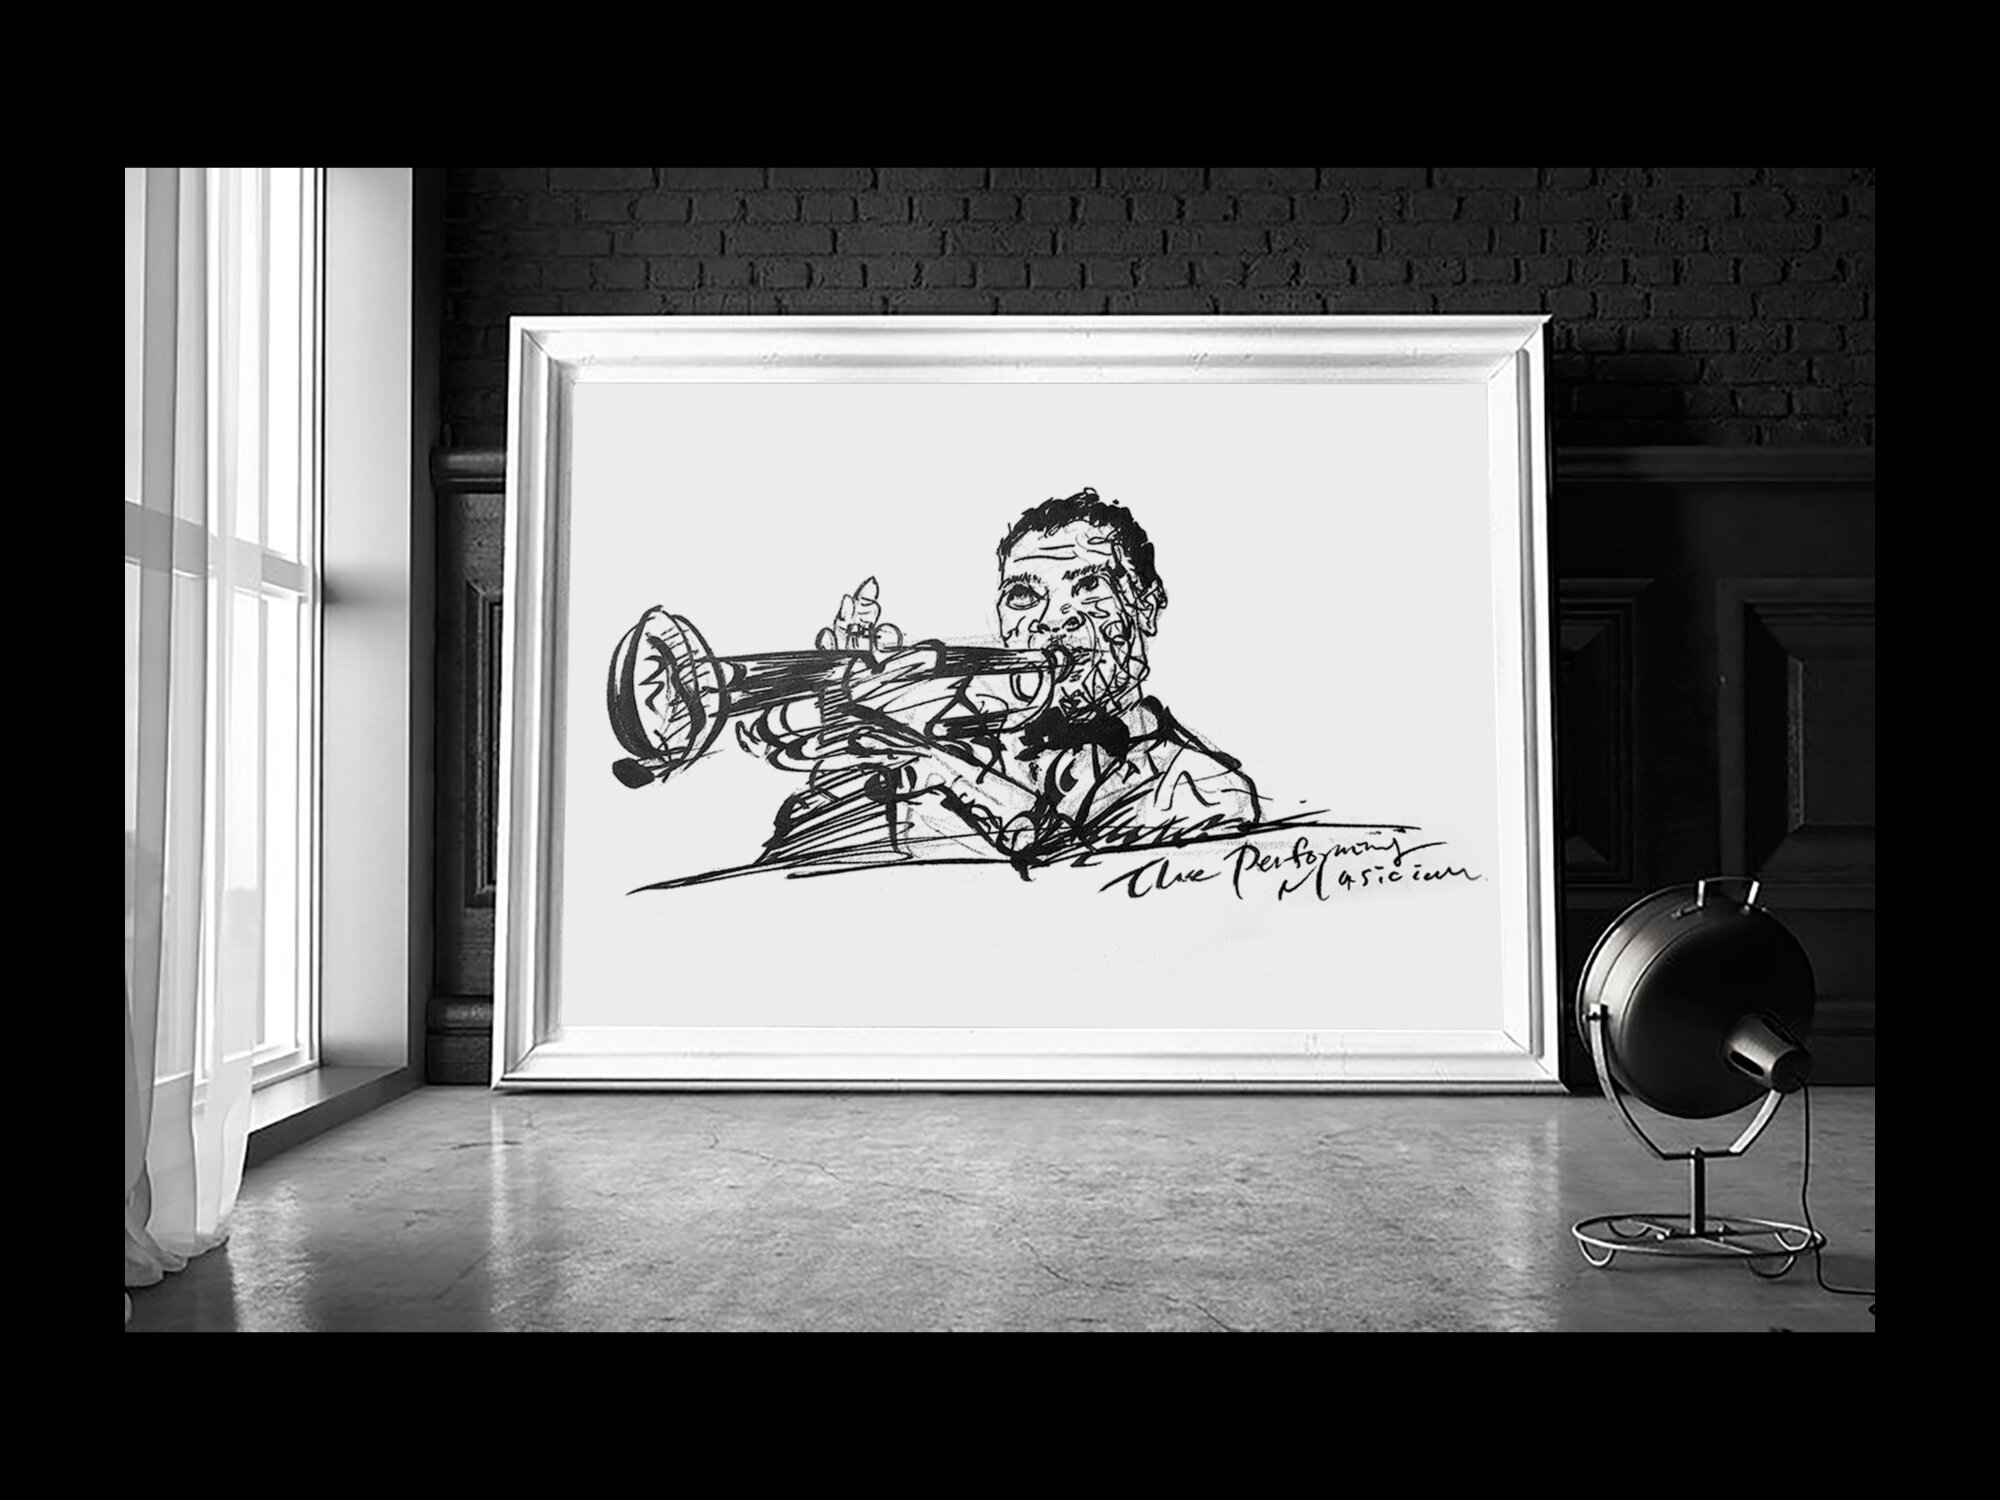 The trumpet player